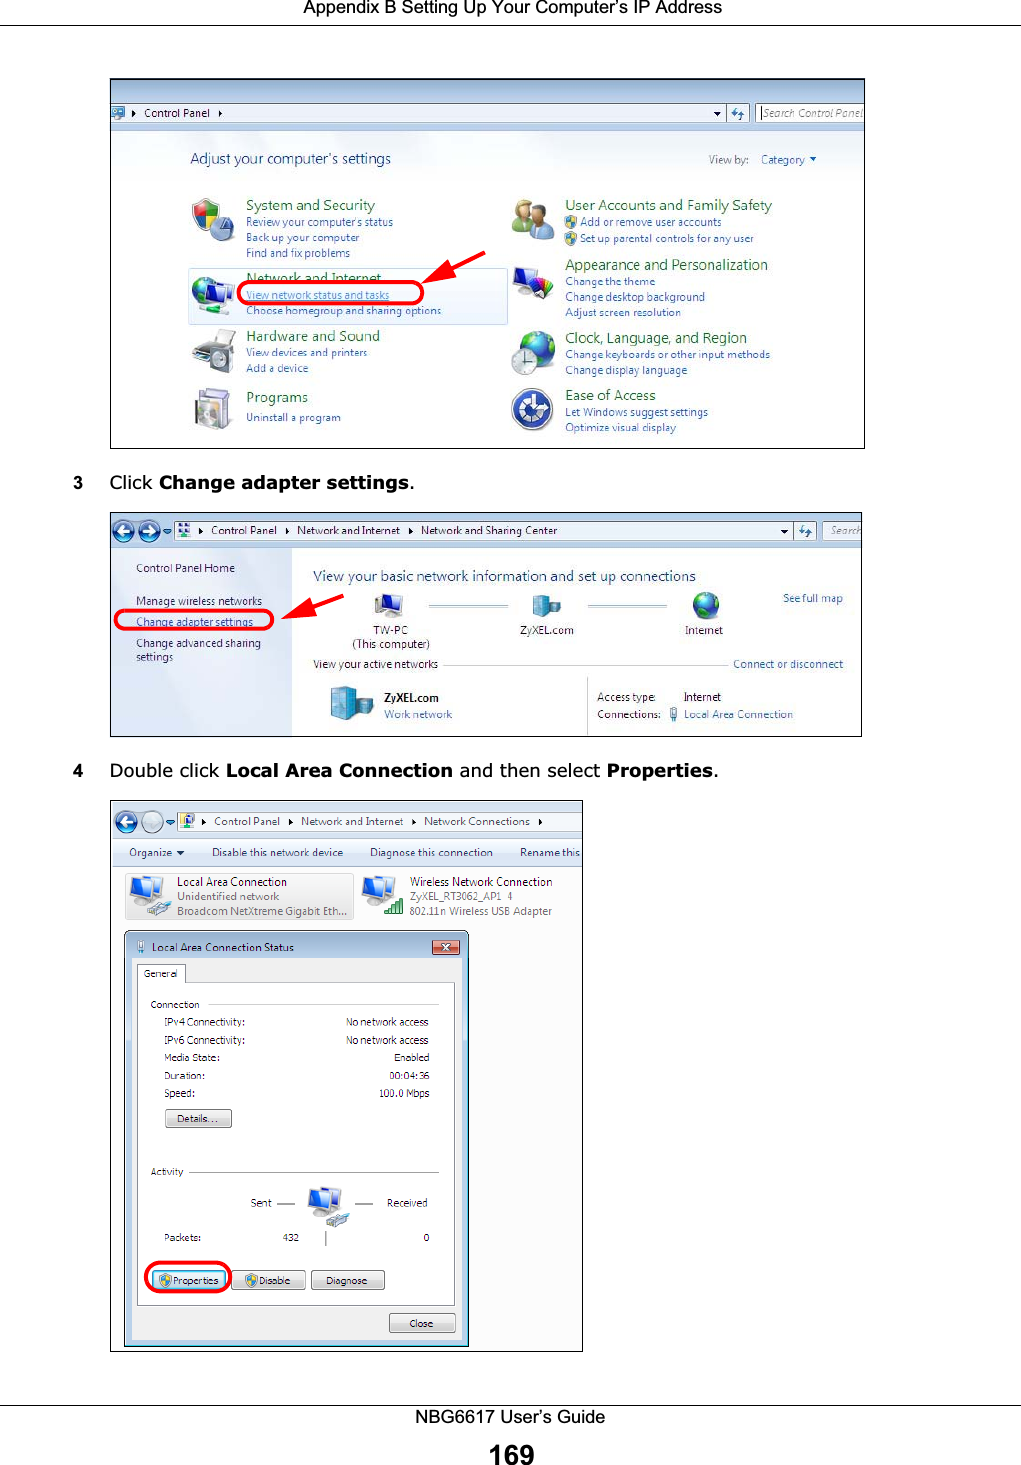  Appendix B Setting Up Your Computer’s IP AddressNBG6617 User’s Guide1693Click Change adapter settings.4Double click Local Area Connection and then select Properties.